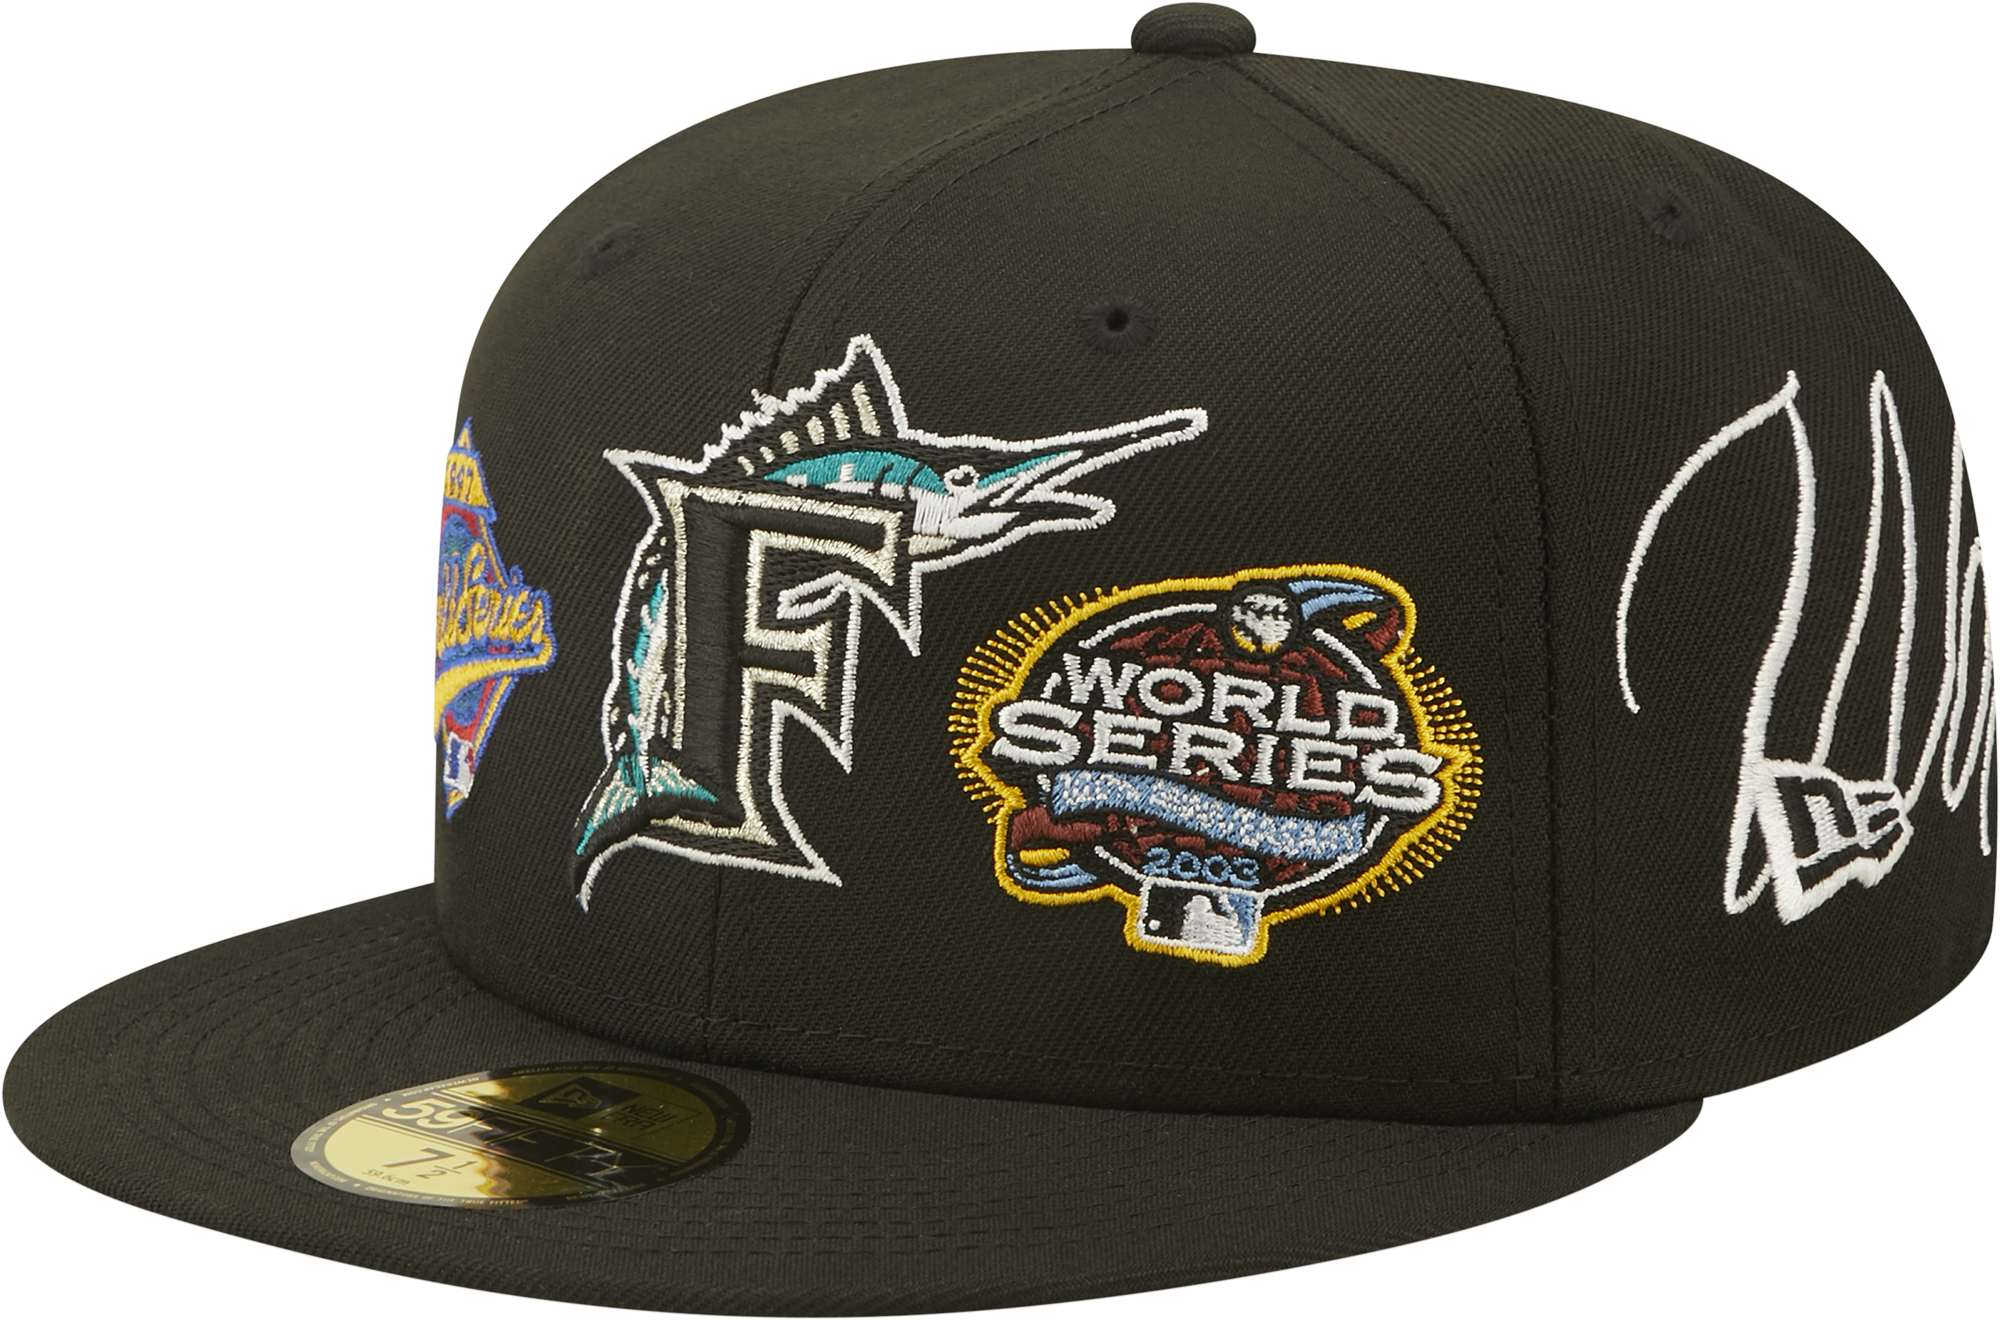 New Era 5950 Florida Marlins Two Tone Fitted Hat in Black/Blue/Grey Size 778 | Cotton/Blend/Wool | Jimmy Jazz